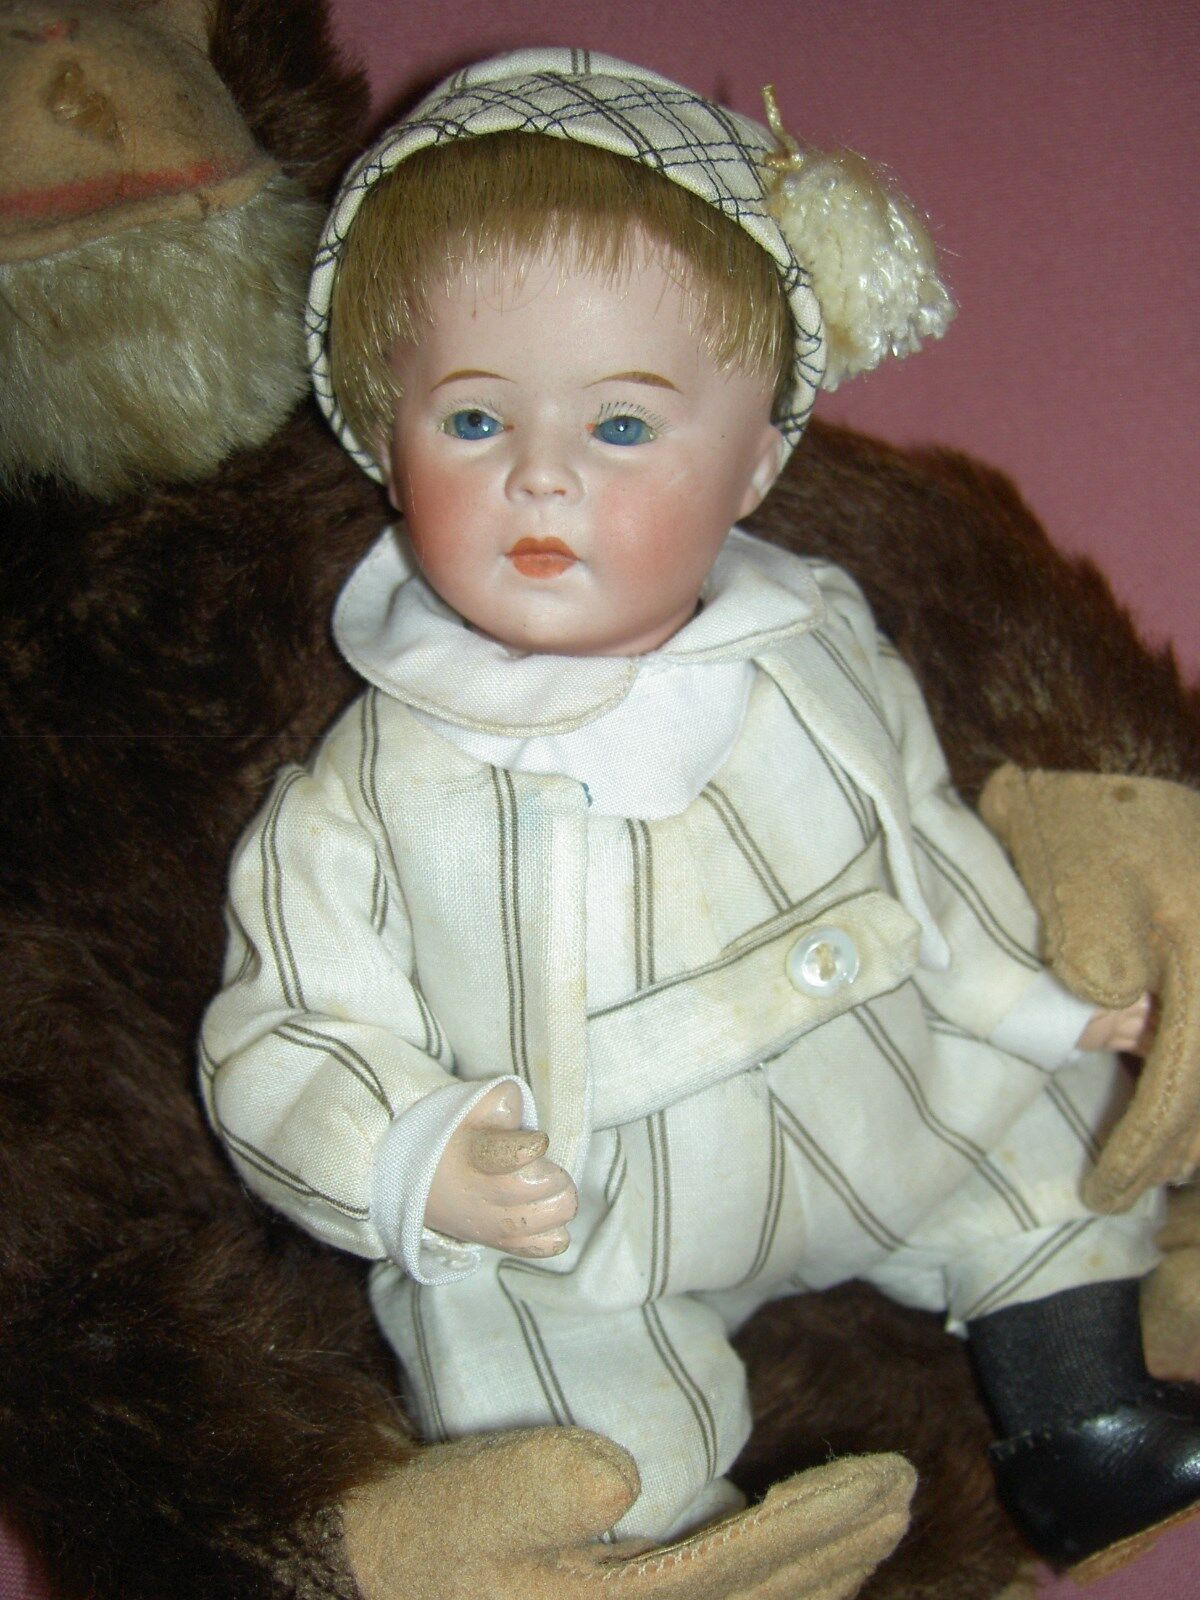 Antique bisque DIP character baby doll by Swaine & Co. Germany, Geschutzt/S&Co.